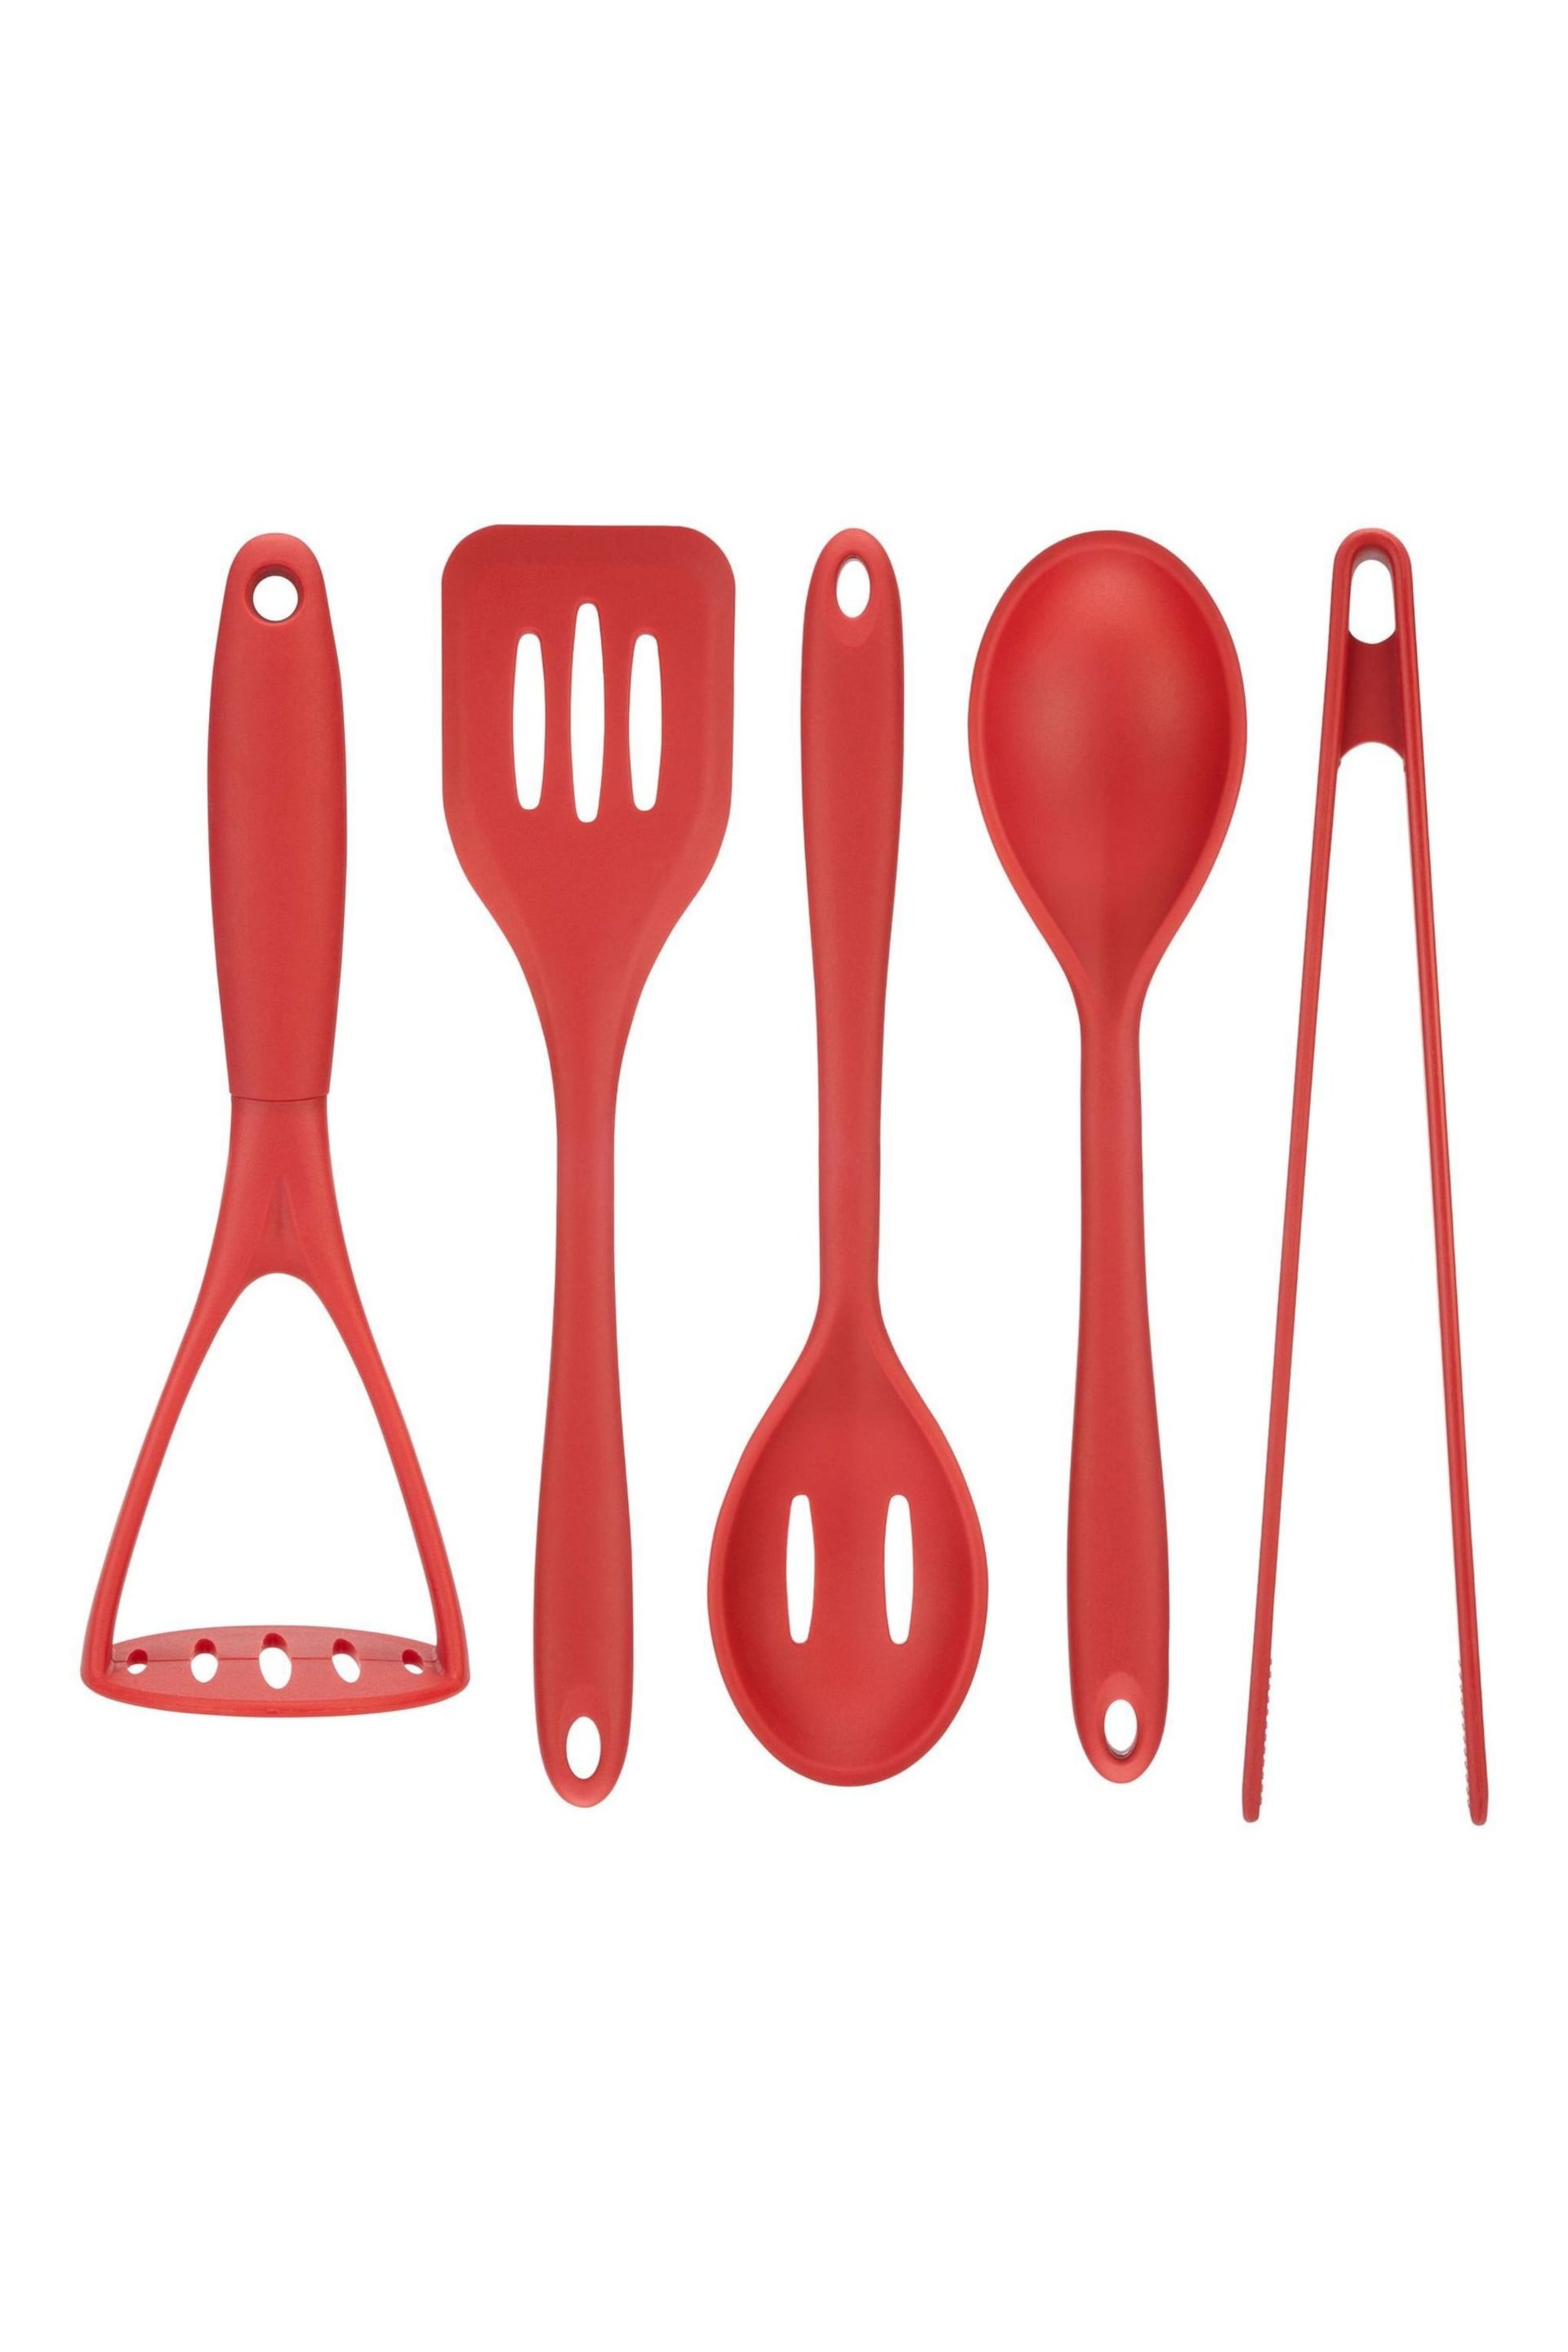 Fusion Red Utensils Set of 5 - Image 2 of 4